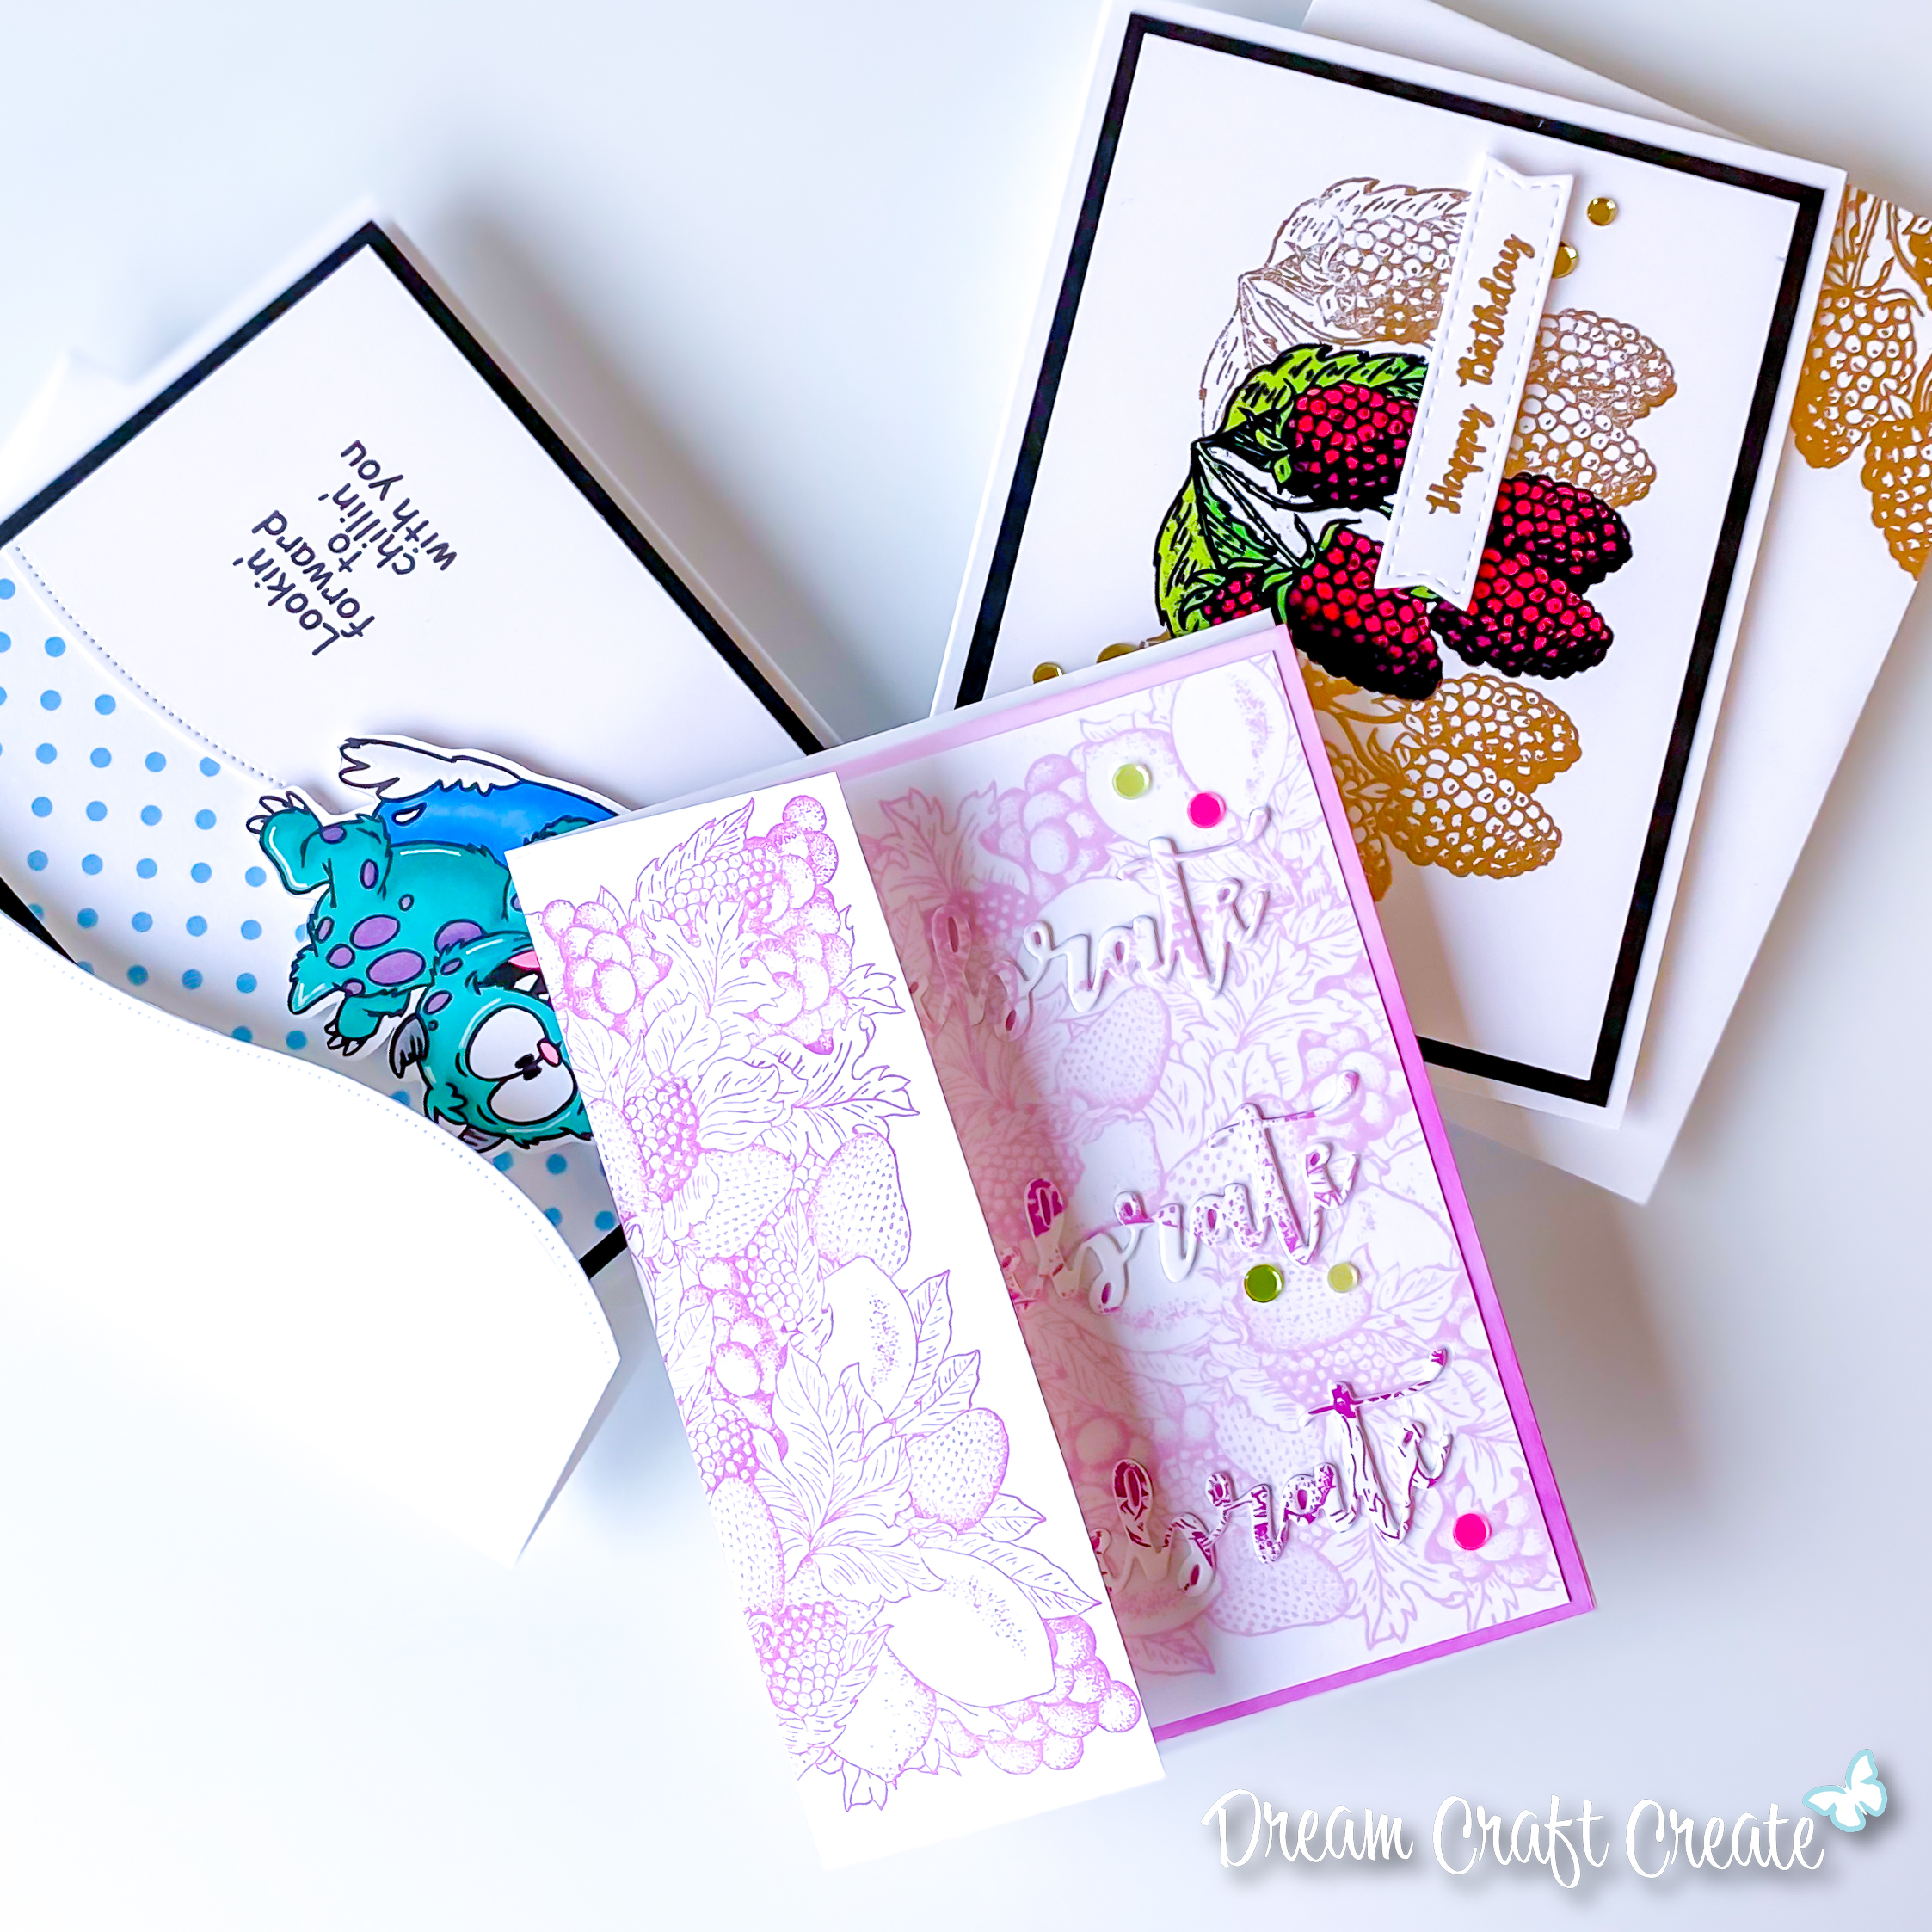 5 Easy Ways to Match Your Envelopes to Your Cards